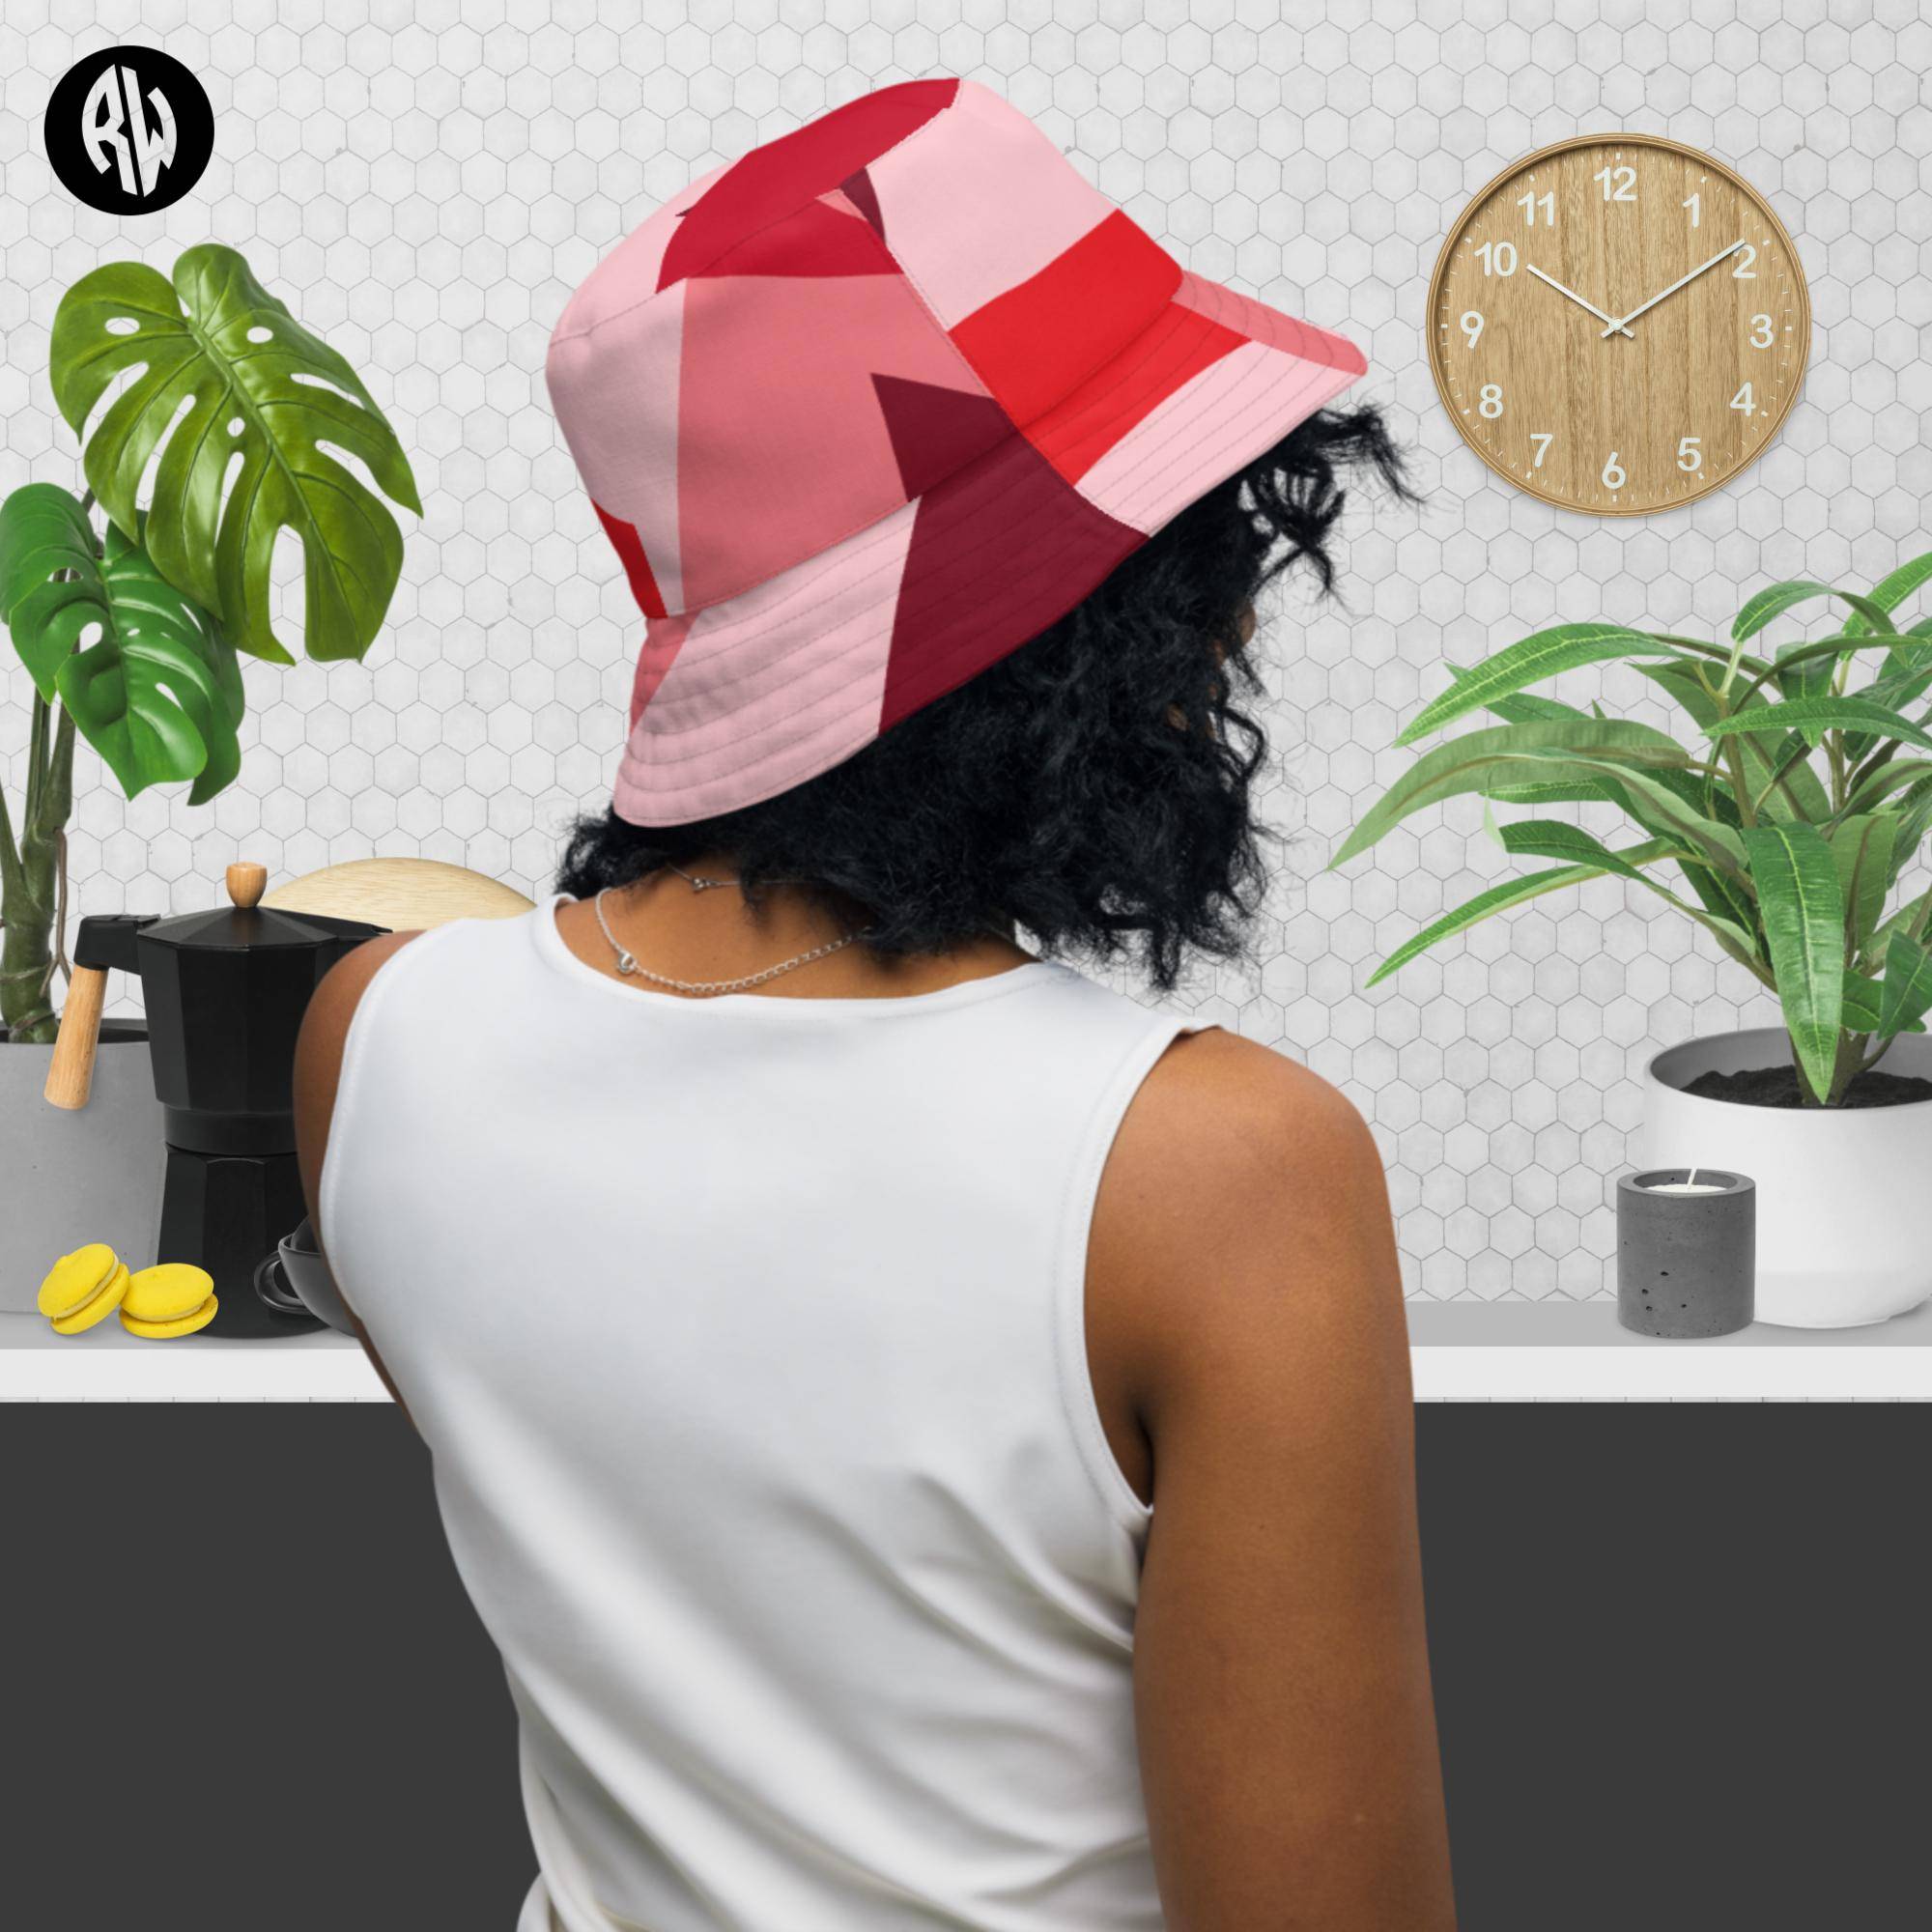 Reversible Bucket Hat Women's Summer Hats - Revive Wear     Women's Bucket Hat. Shop Wide Brim Hats for Women. Sun Protection. Breathable fabric. Match with your activewear. Discounts on your first purchase.